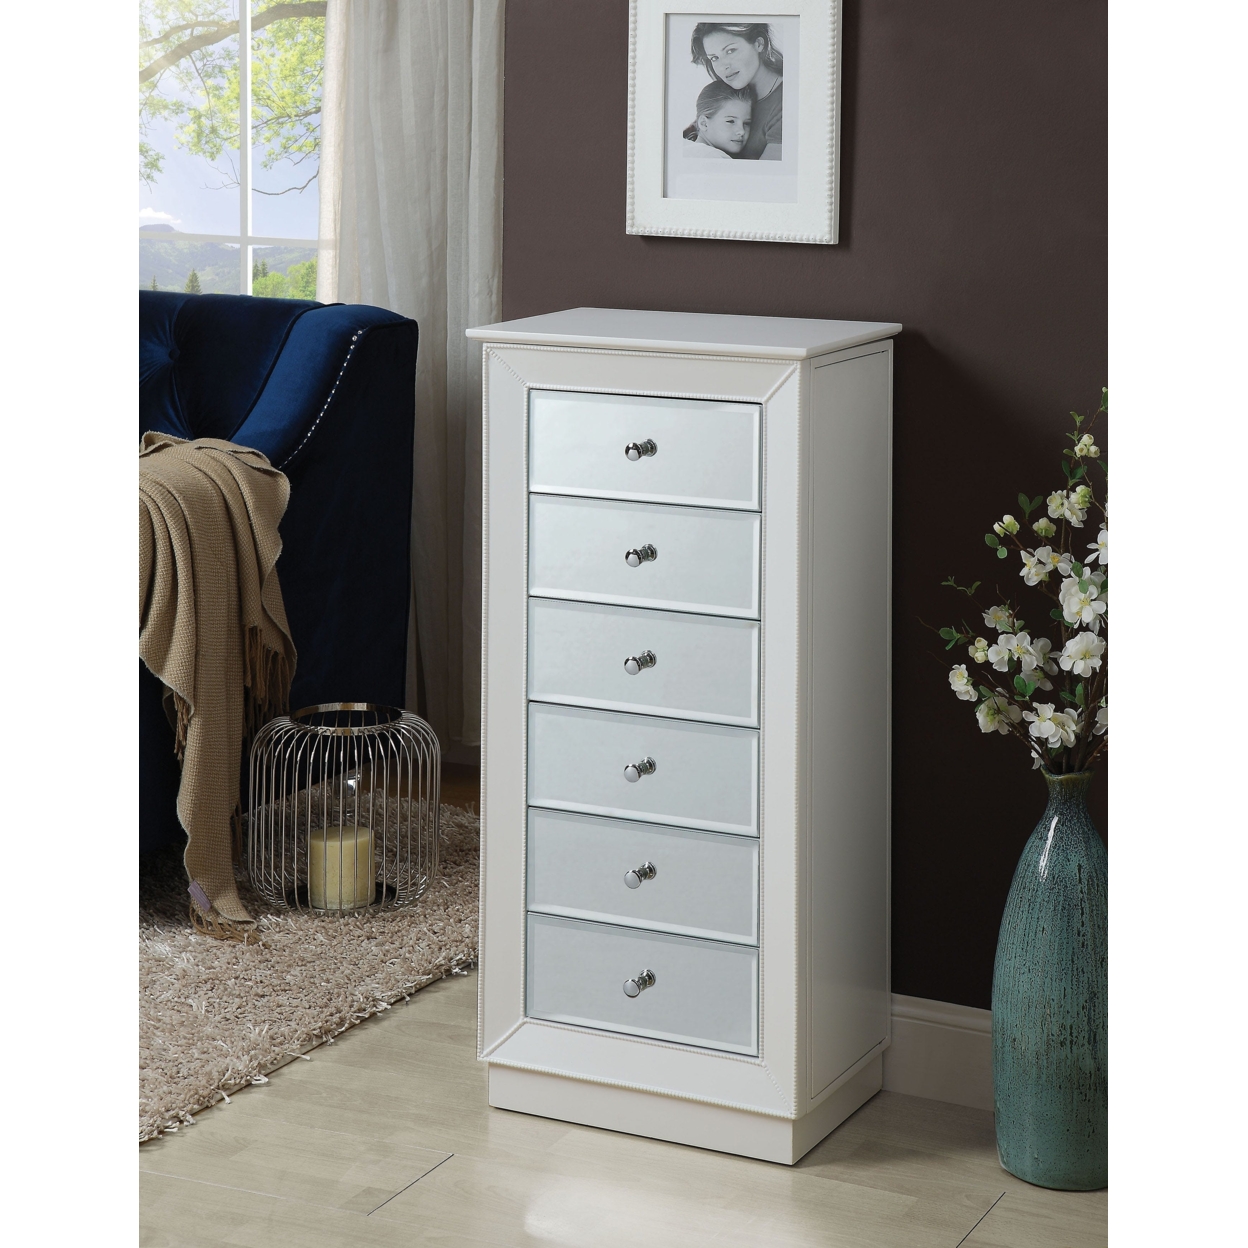 Wood Jewelry Armoire Having 6 Drawers With Mirror Front, White- Saltoro Sherpi